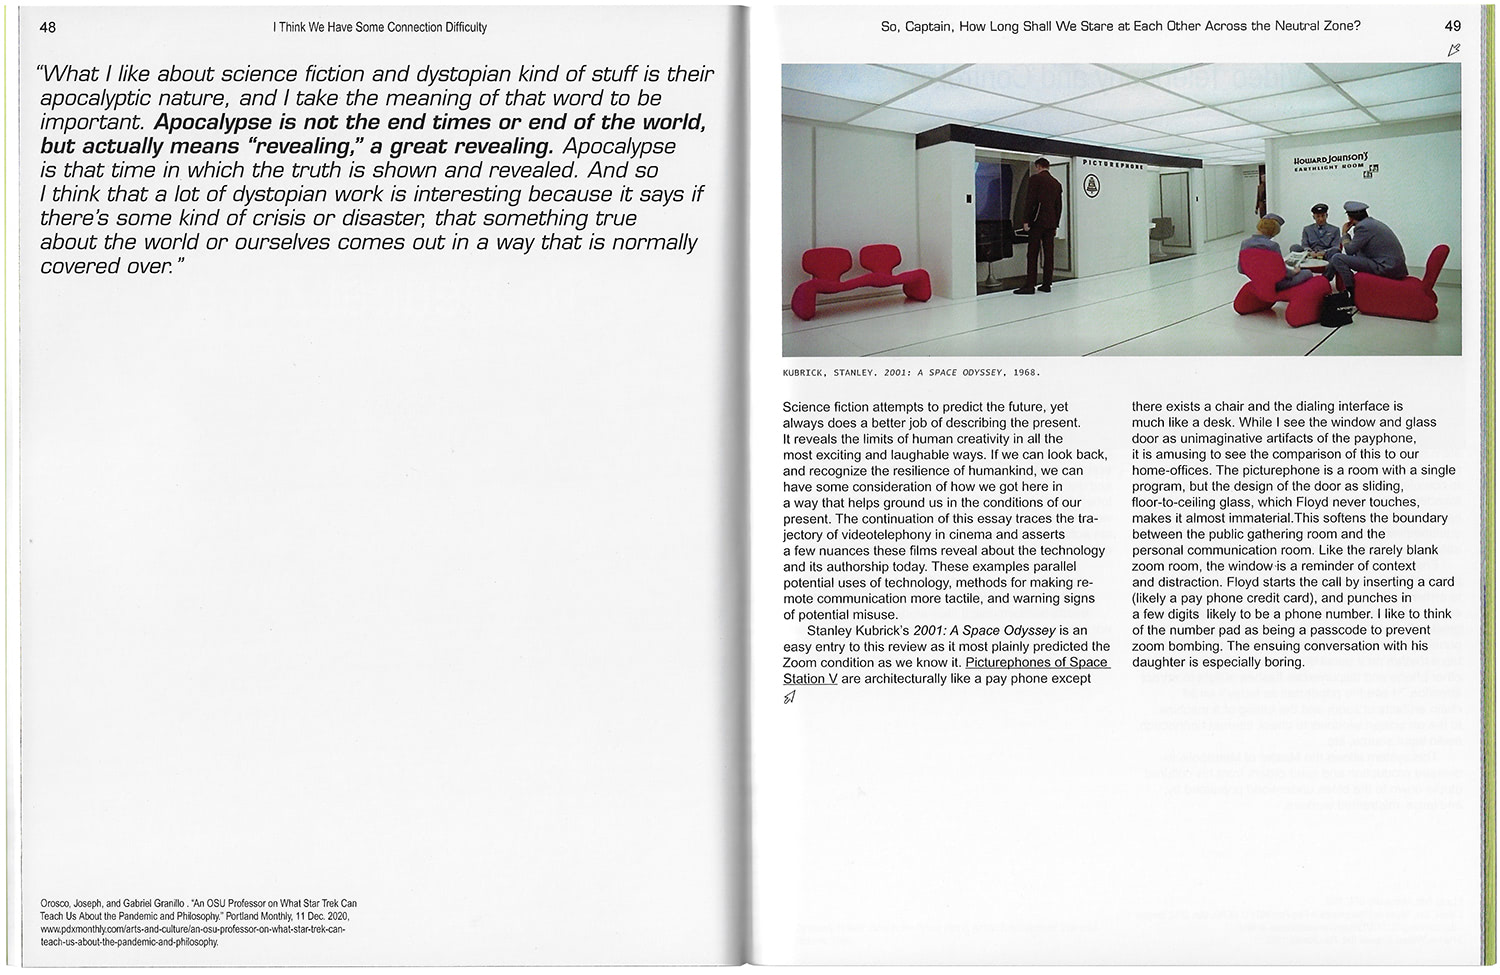 interior spread of book with image from Stanley Kubrick's 20001: A Space Odyssey.